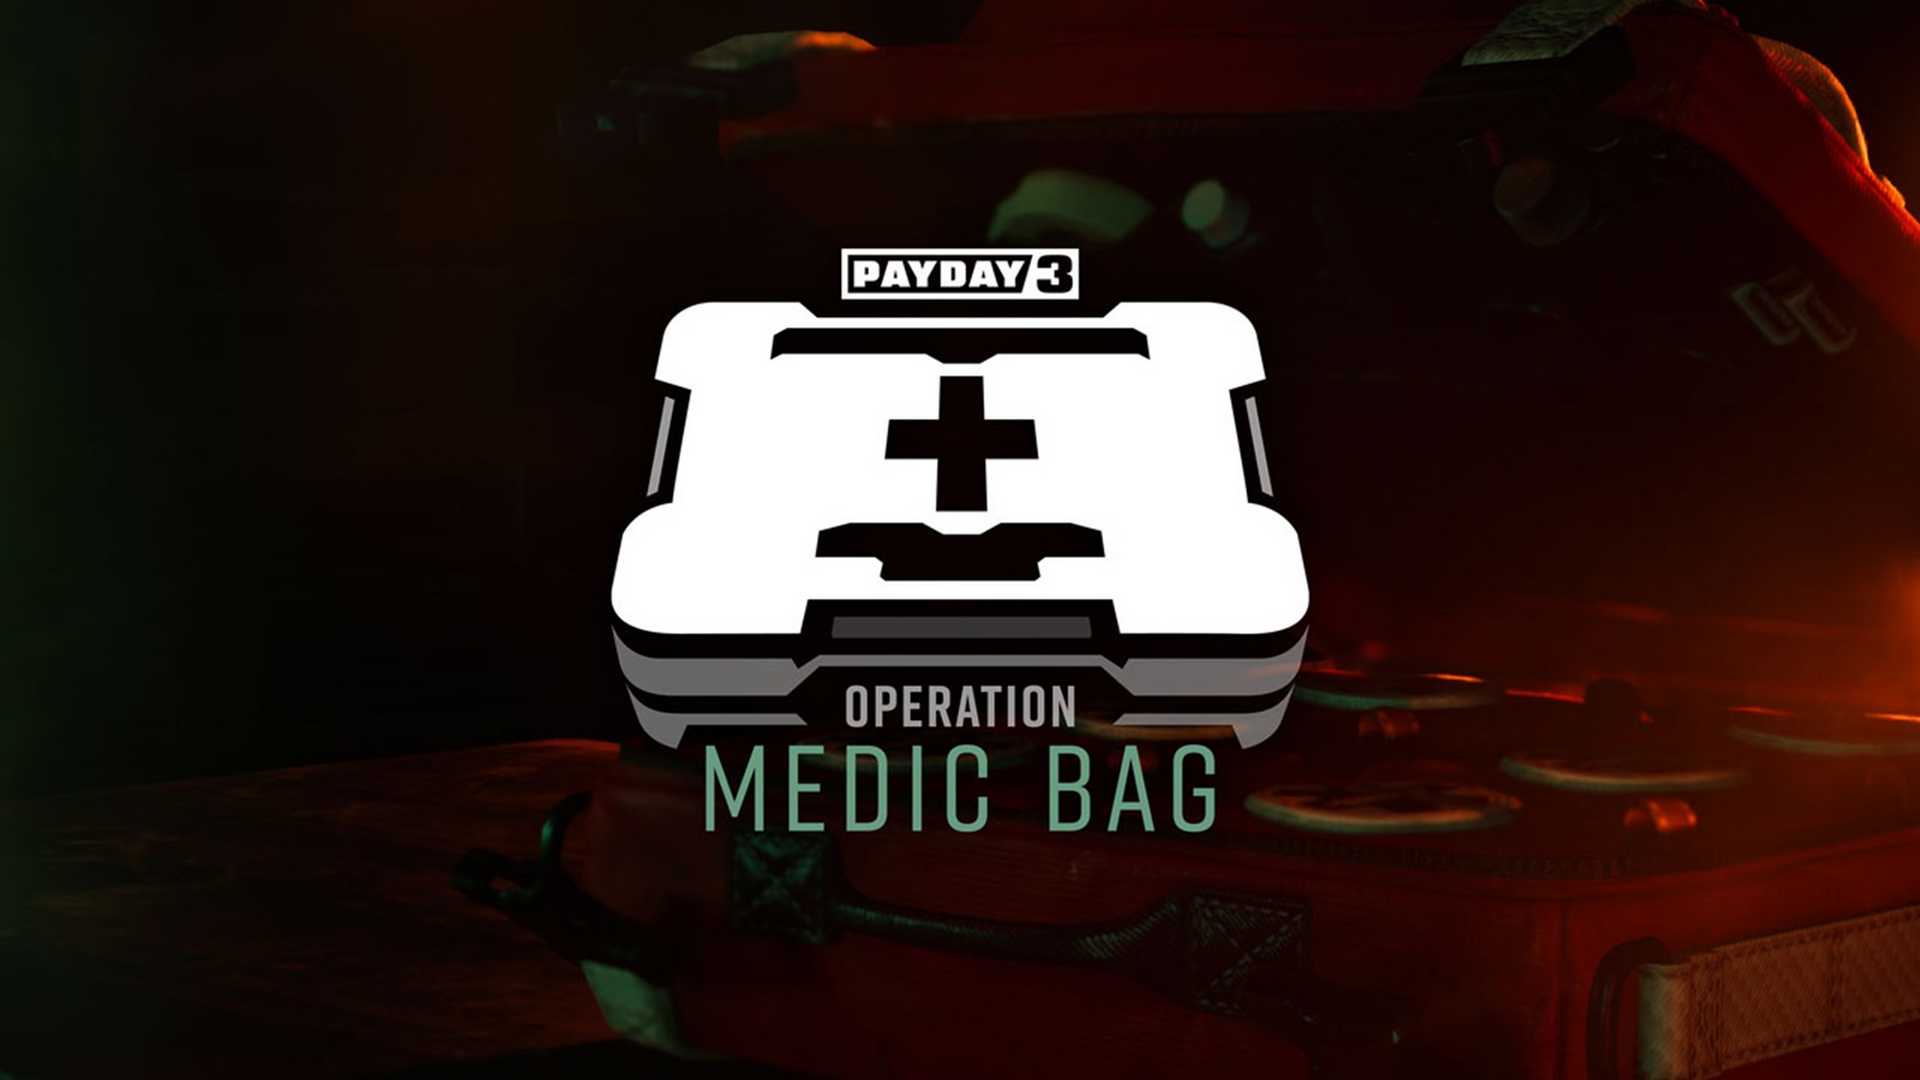 Payday 3 – First Patch Of “Operation Medic Bag” Out Now With First Improvements And Features